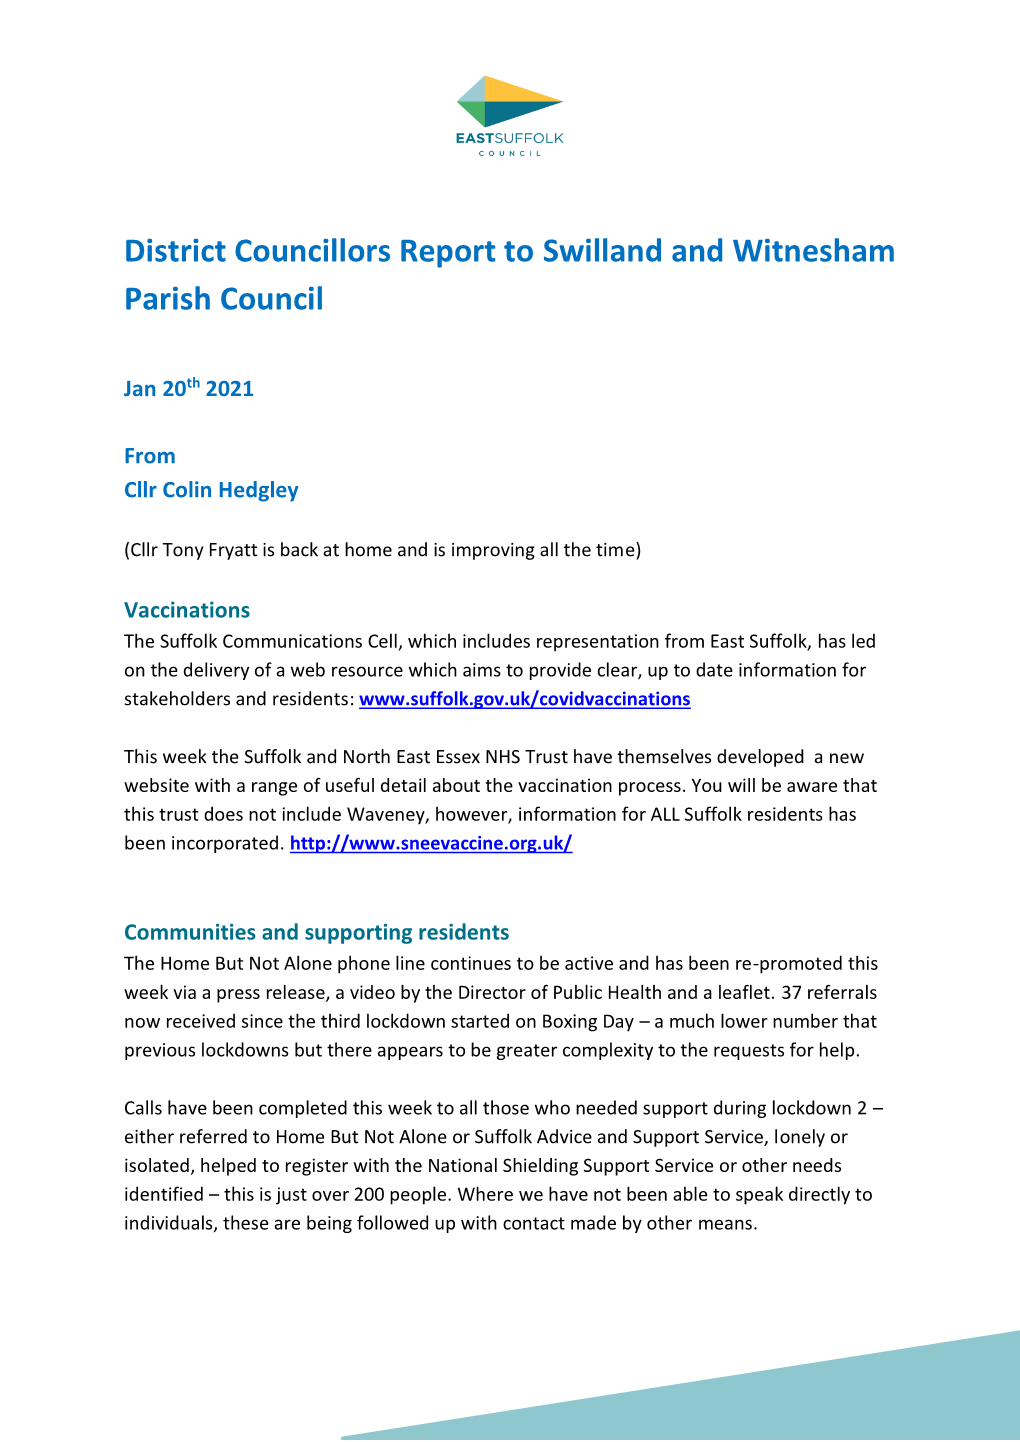 District Councillors Report to Swilland and Witnesham Parish Council